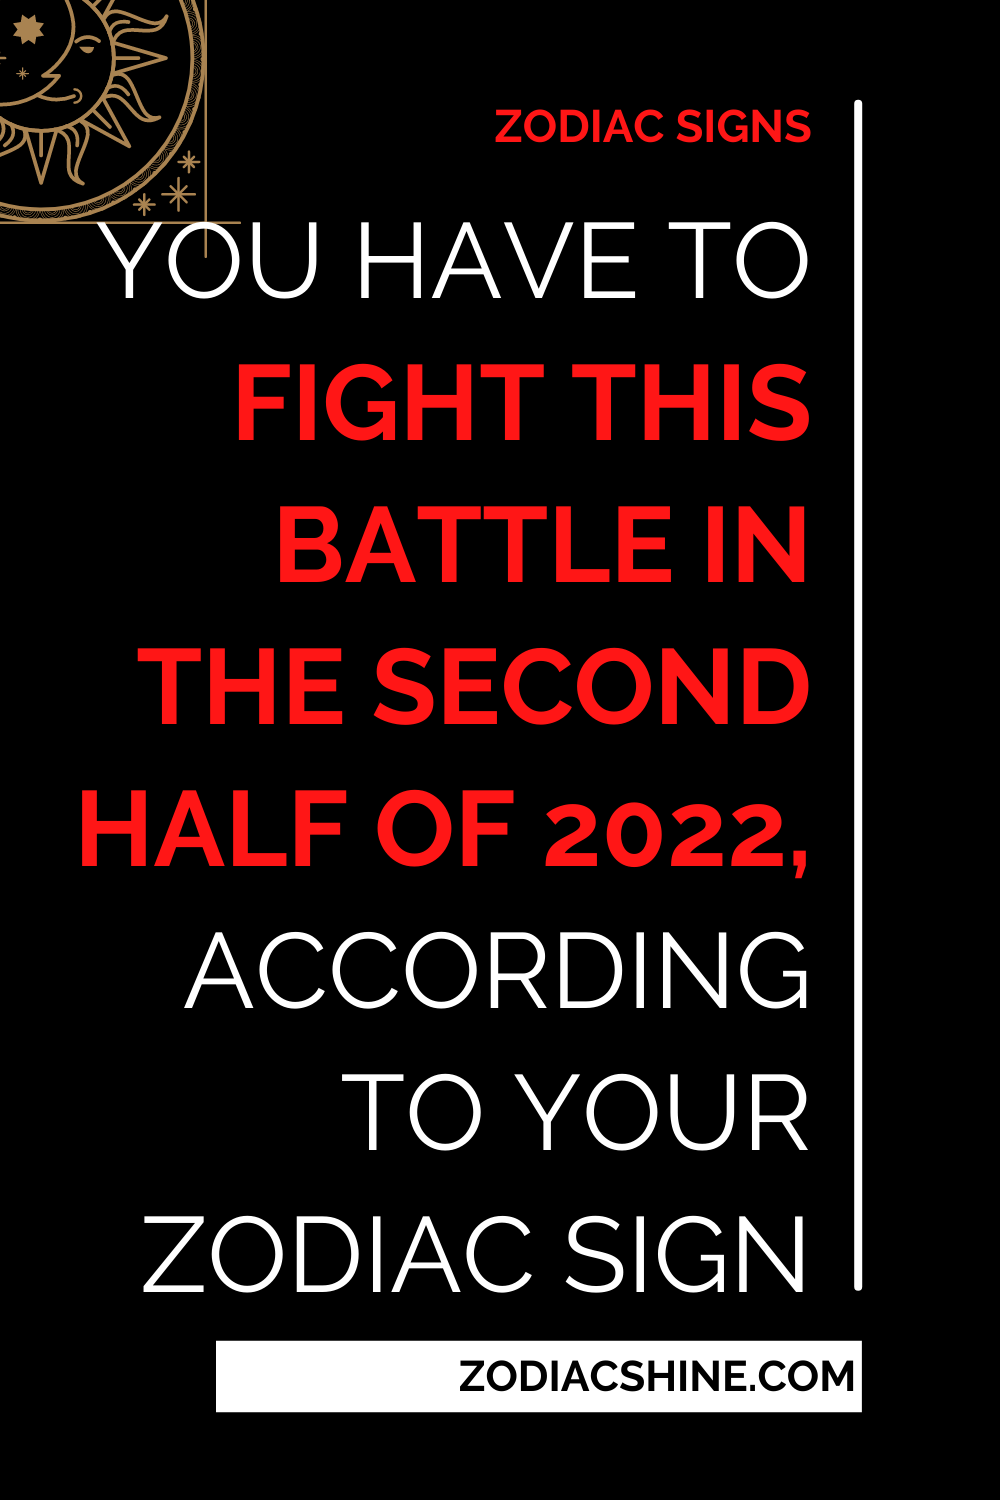 You Have To Fight This Battle In The Second Half Of 2022 According To Your Zodiac Sign